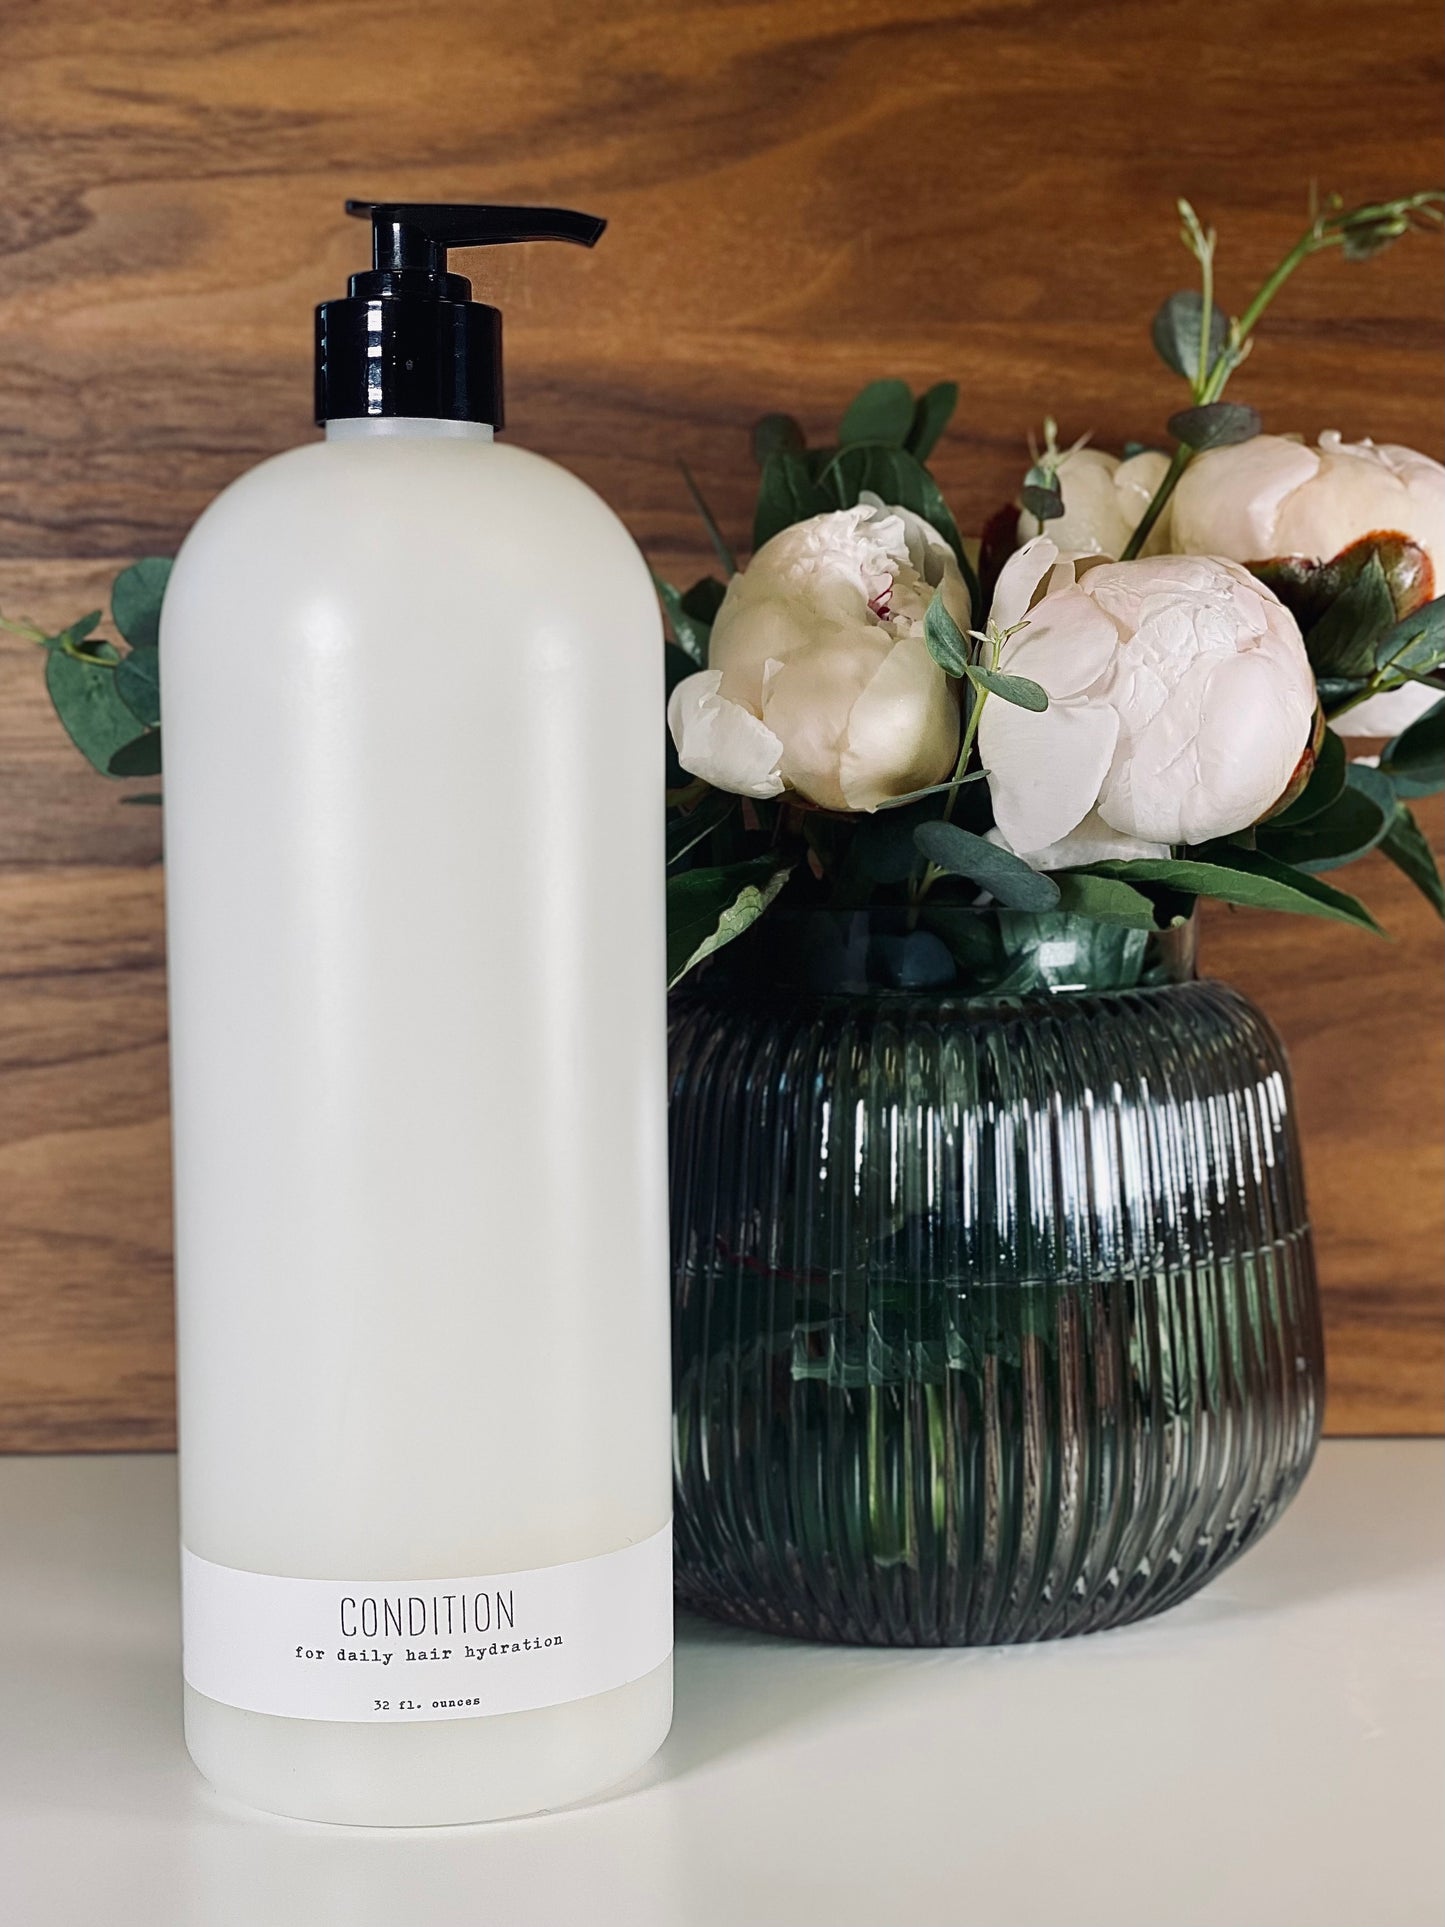 Condition - For Daily Hair Hydration